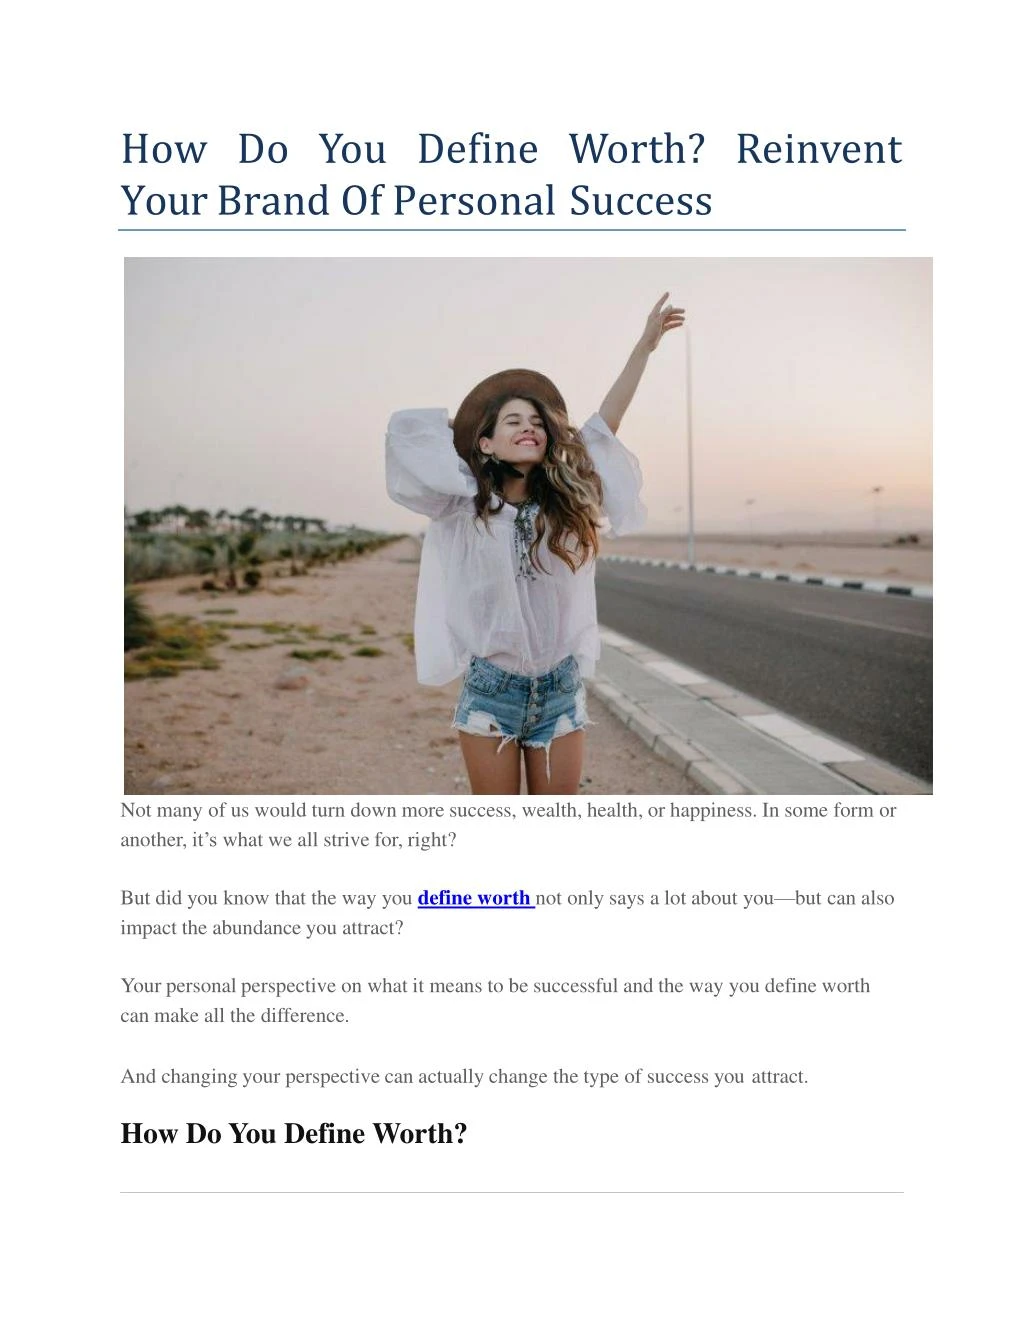 h o w d o y o u d ef i n e w o r t h r e i nv en t your brand of personal success